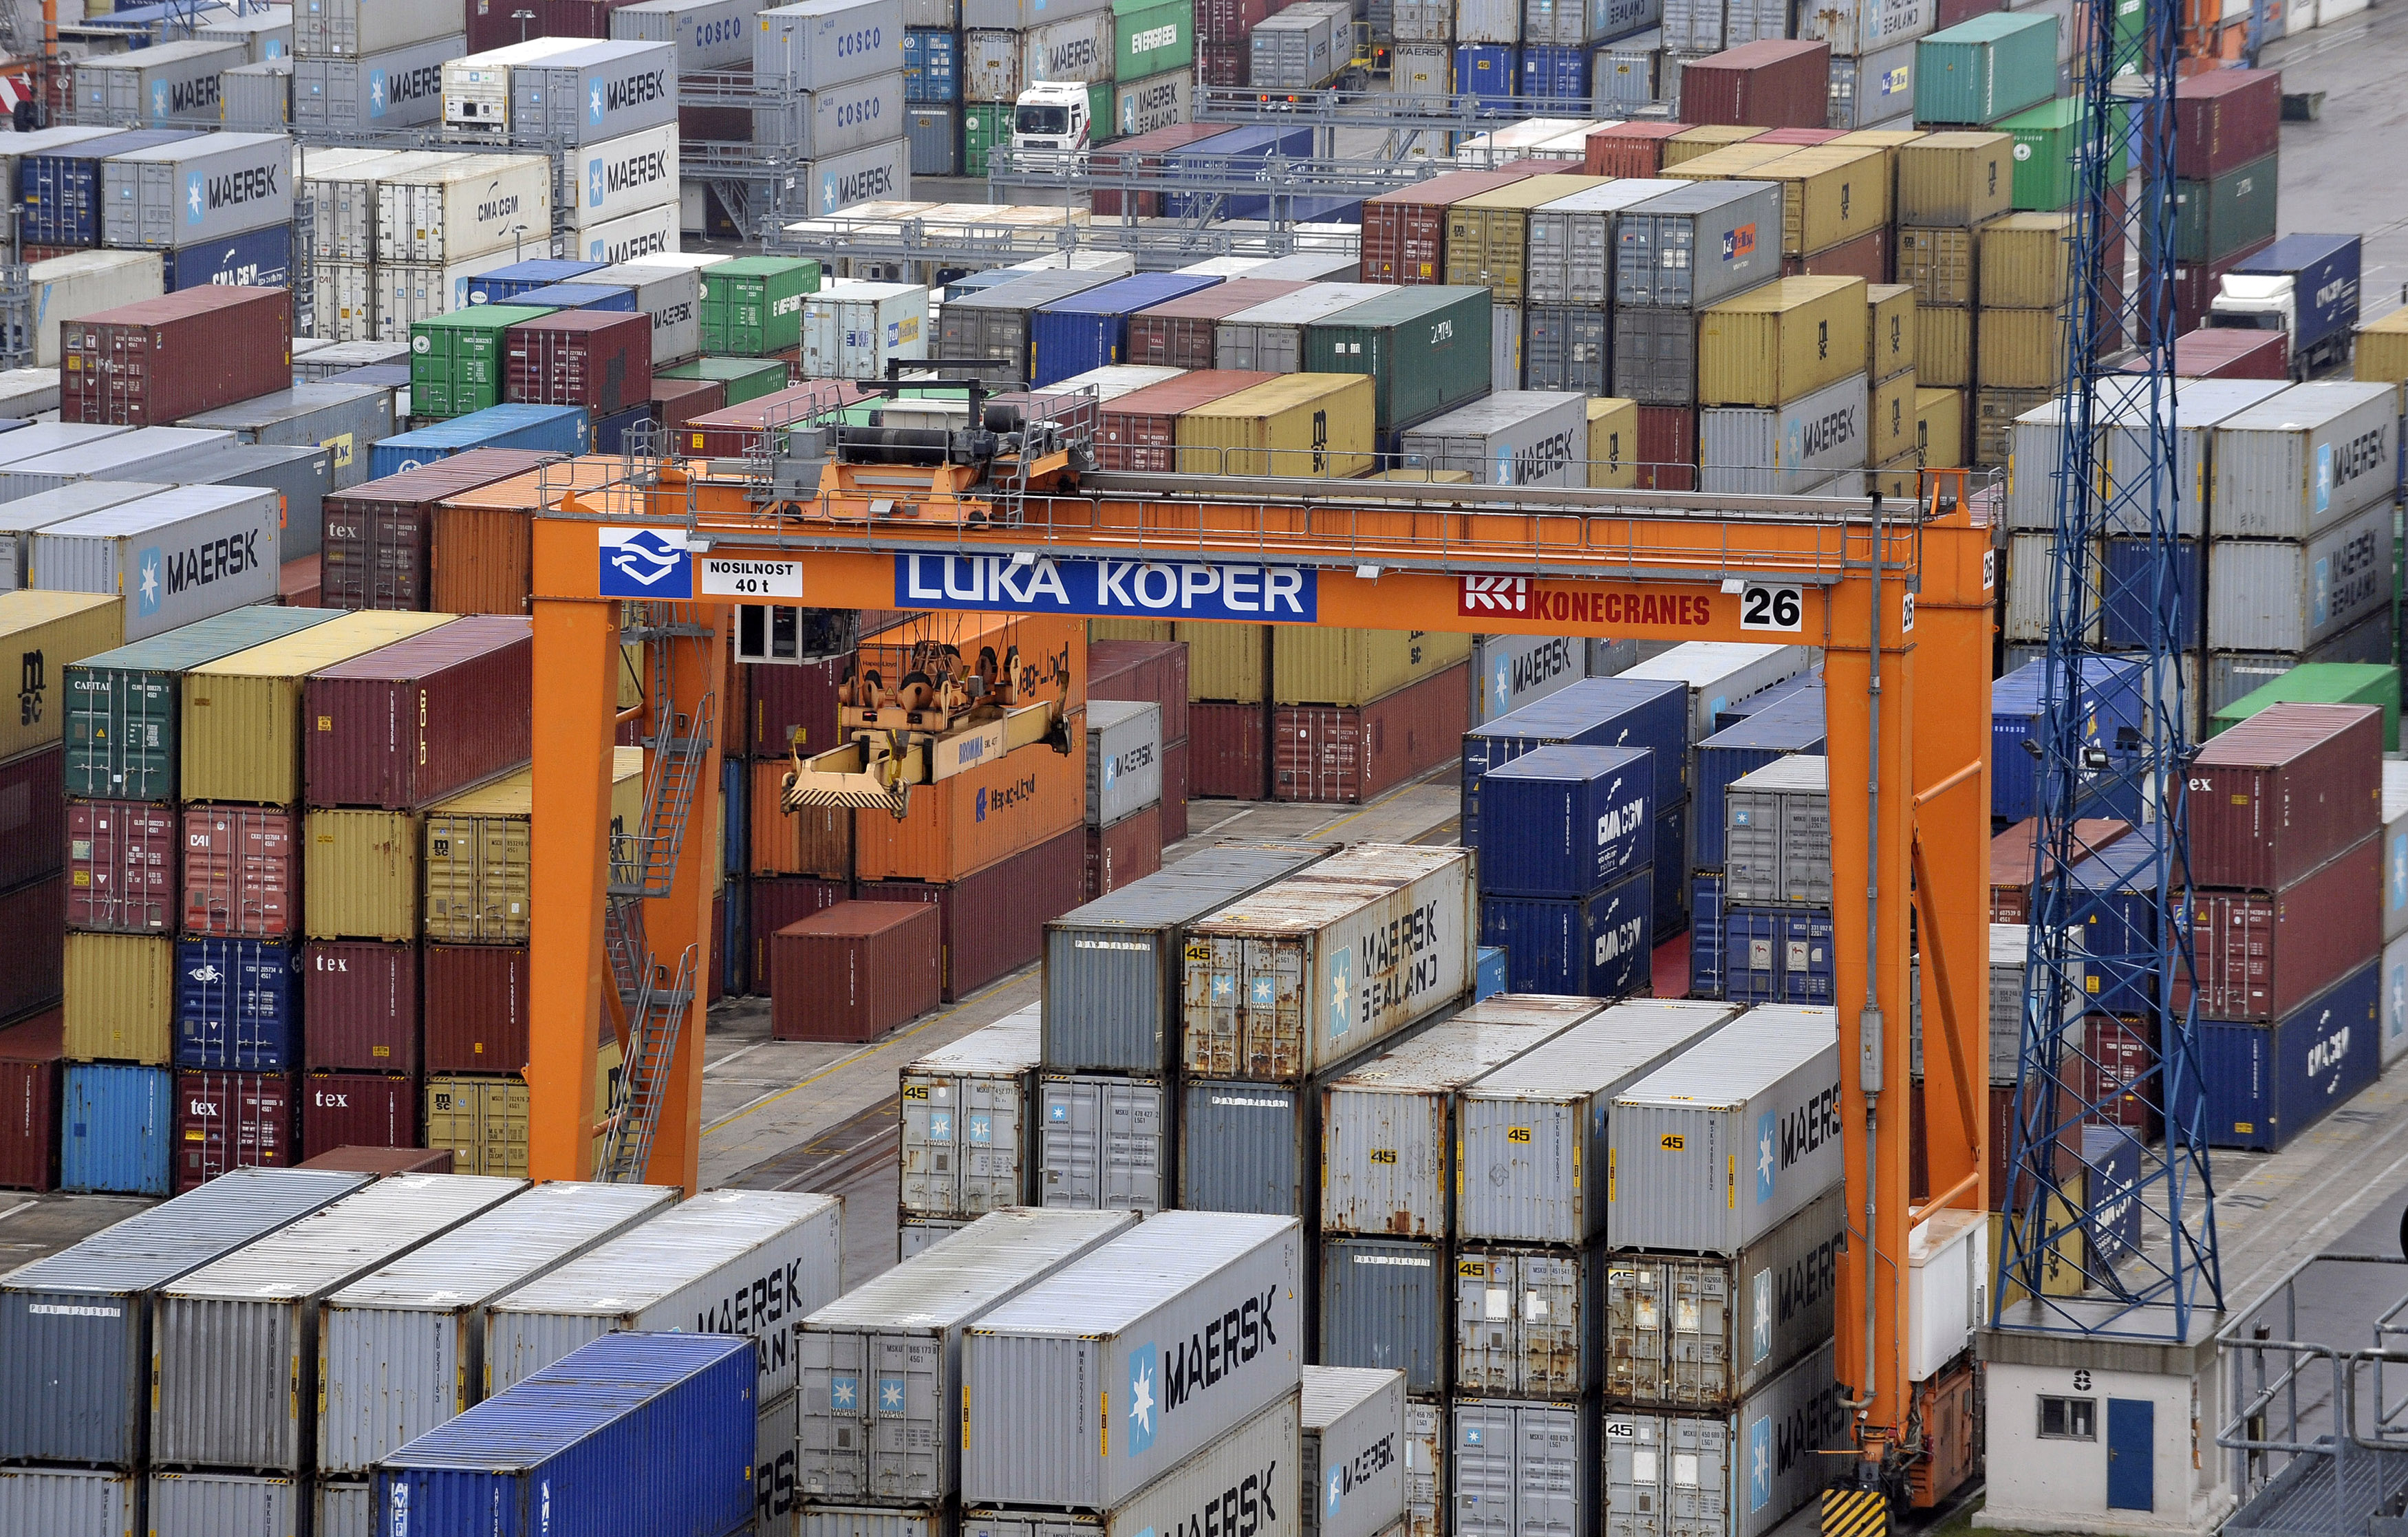 A crane is pictured next to lined up containers at the Port of Koper